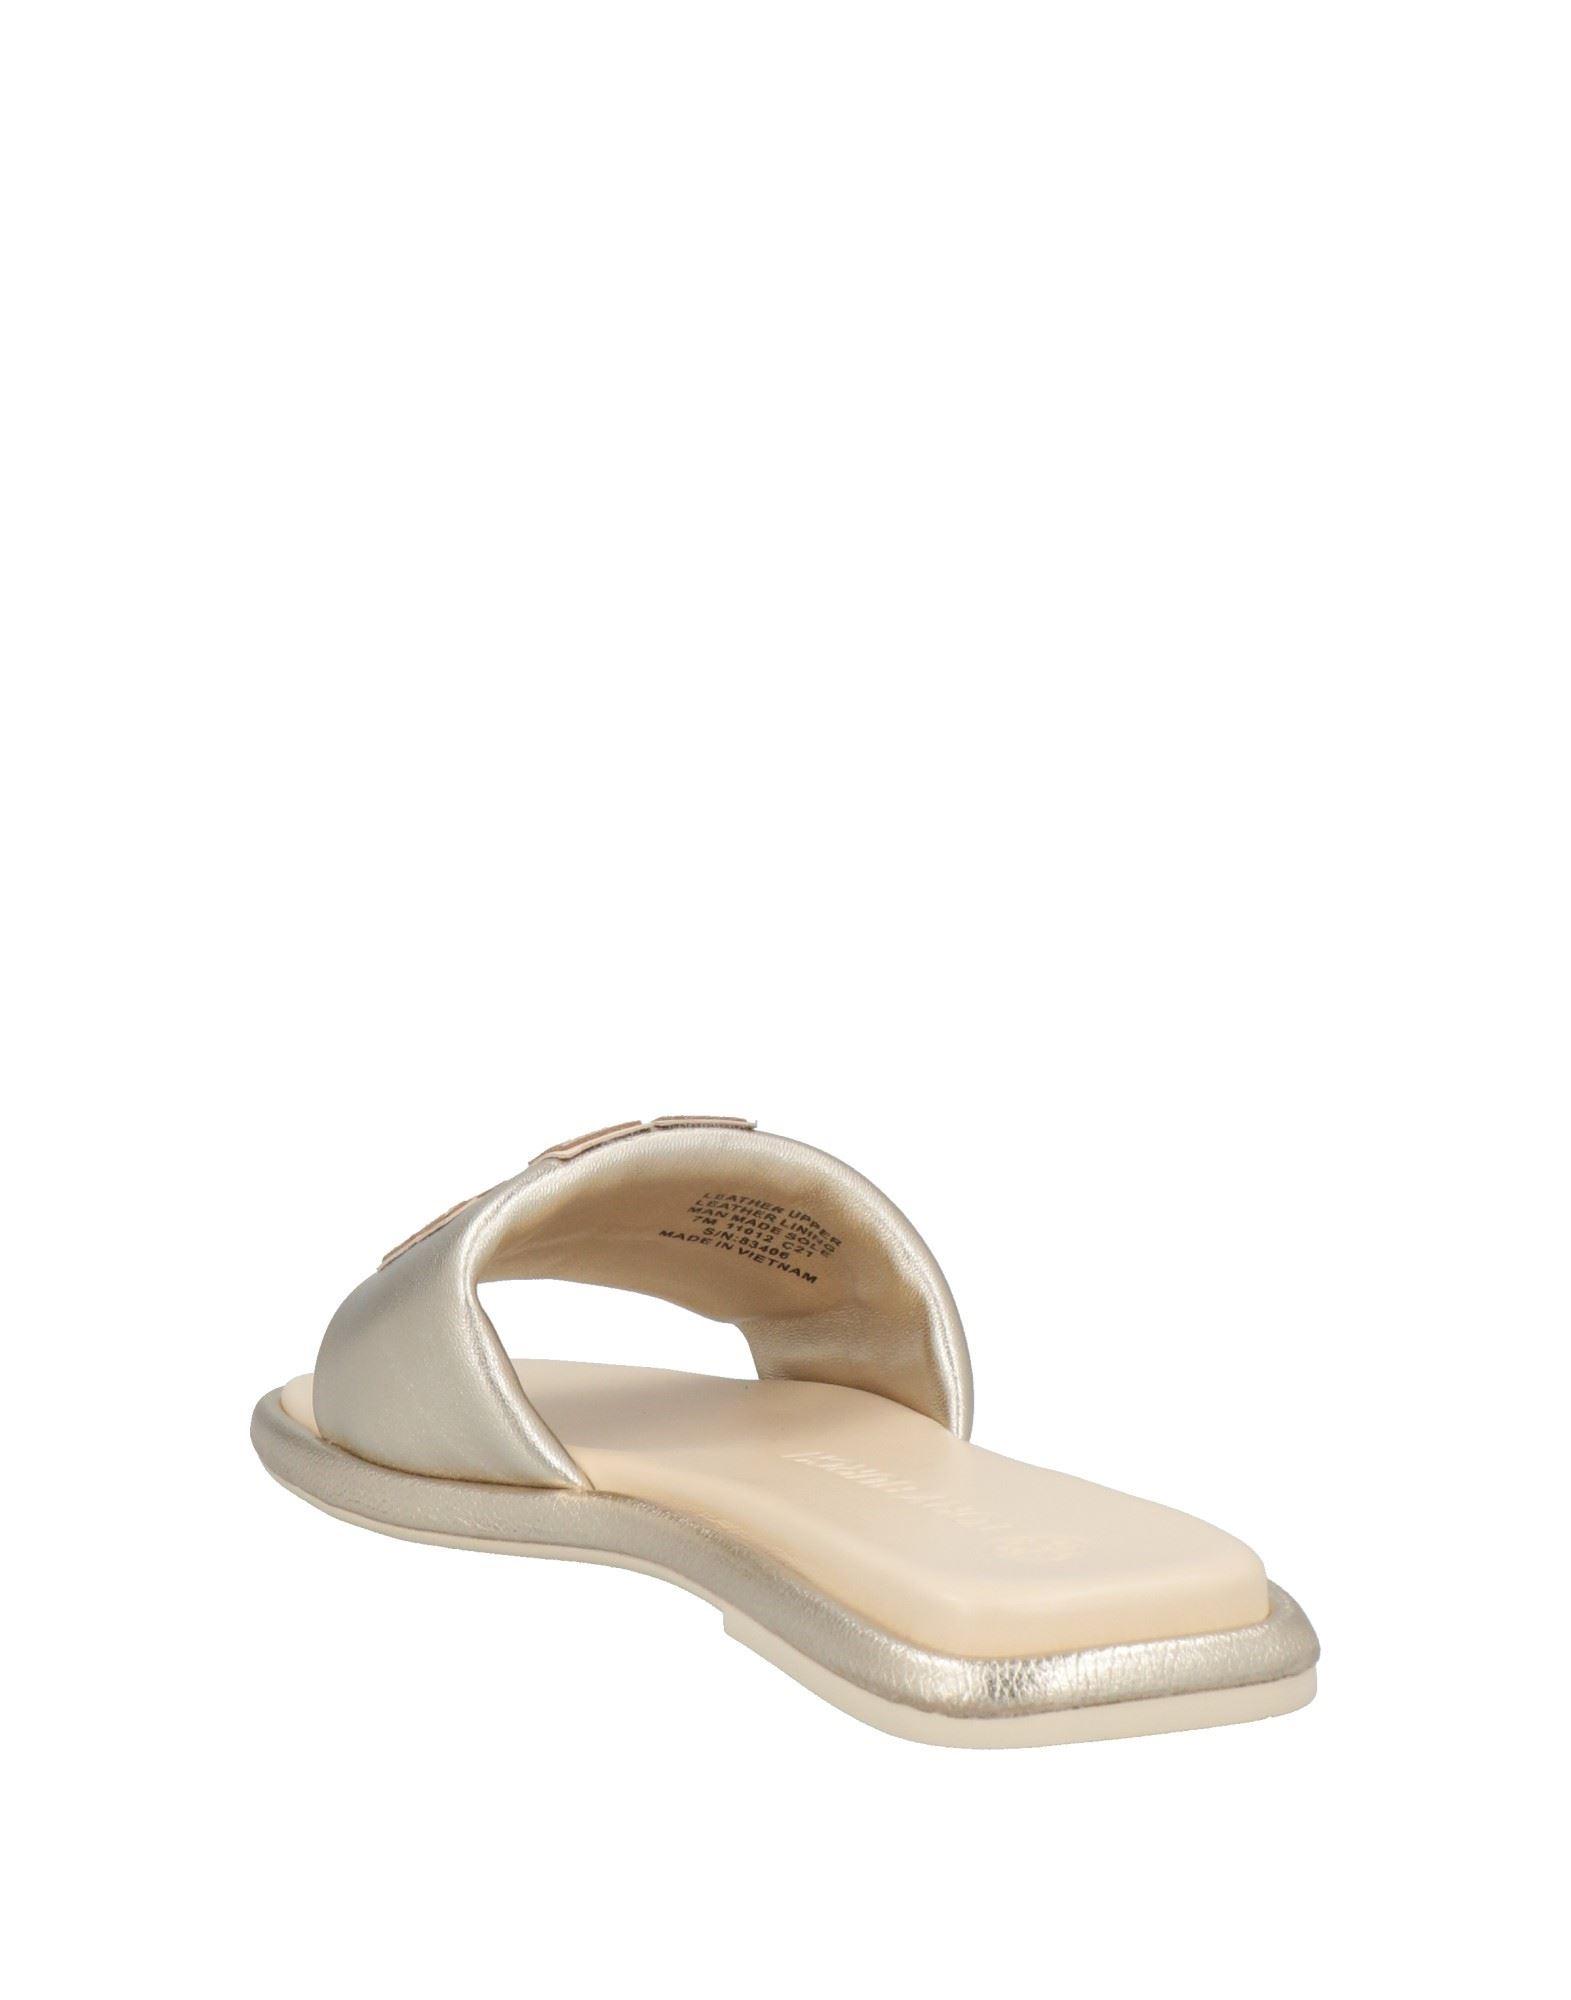 Tory Burch Sandals in White | Lyst